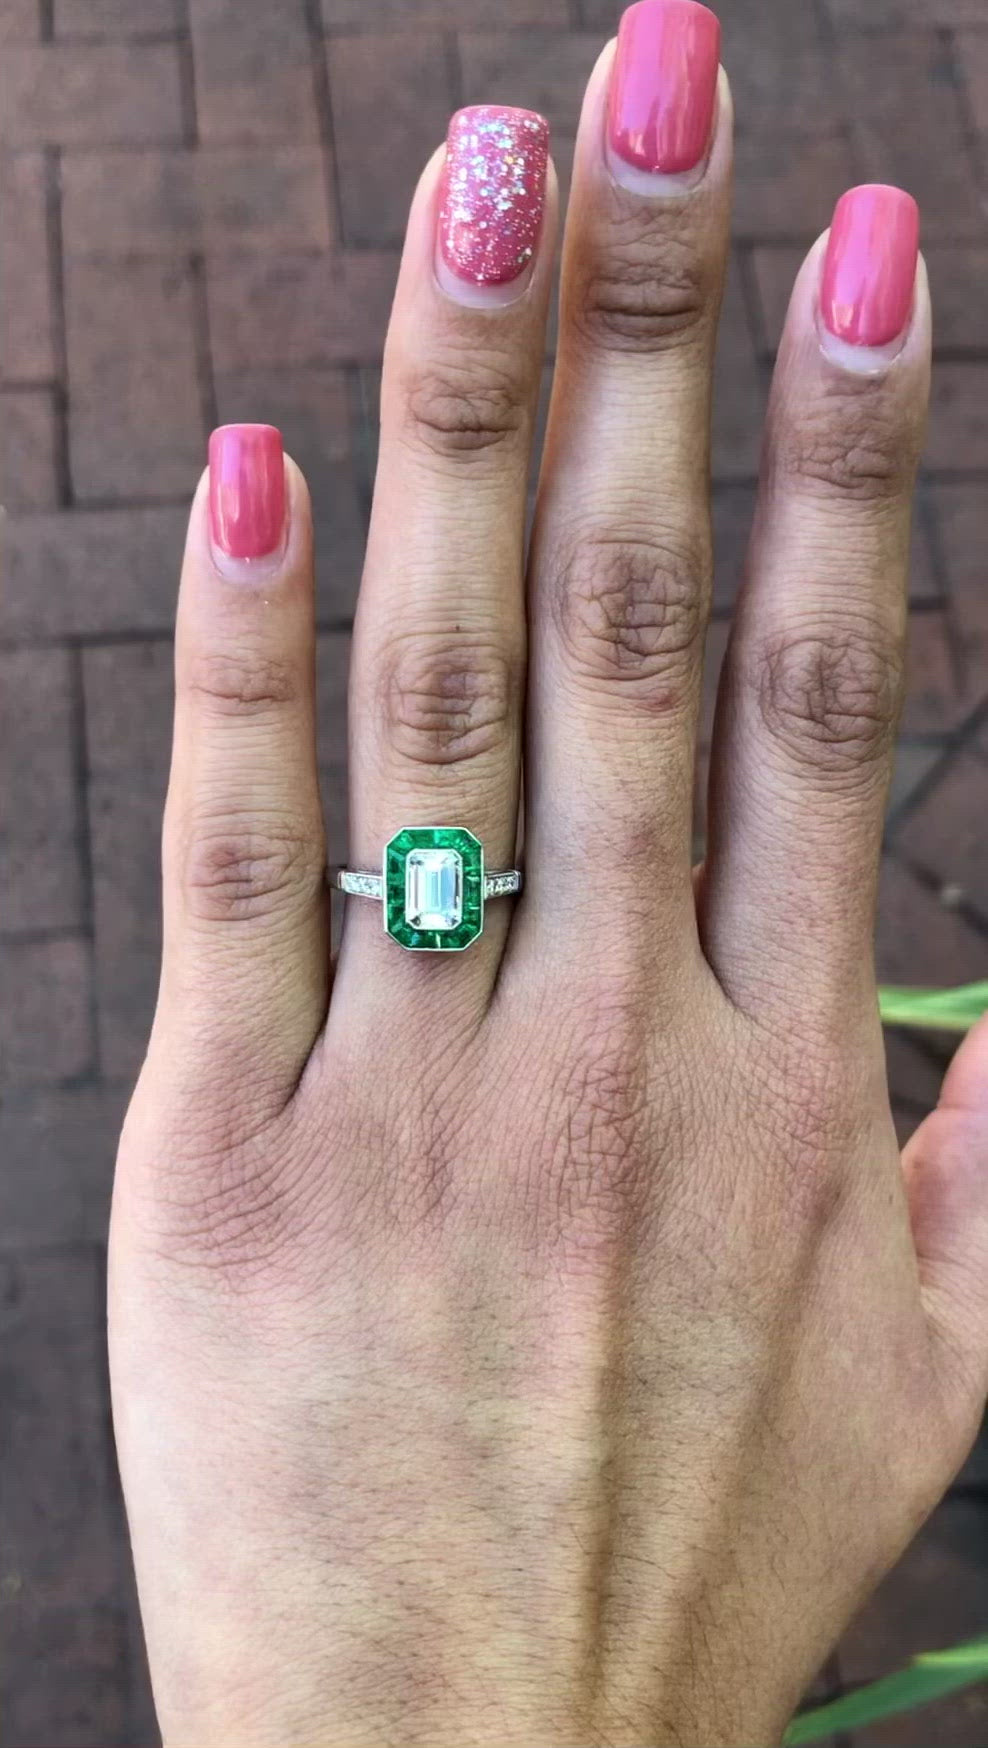 An Art Deco style emeralds and diamonds wedding ring.